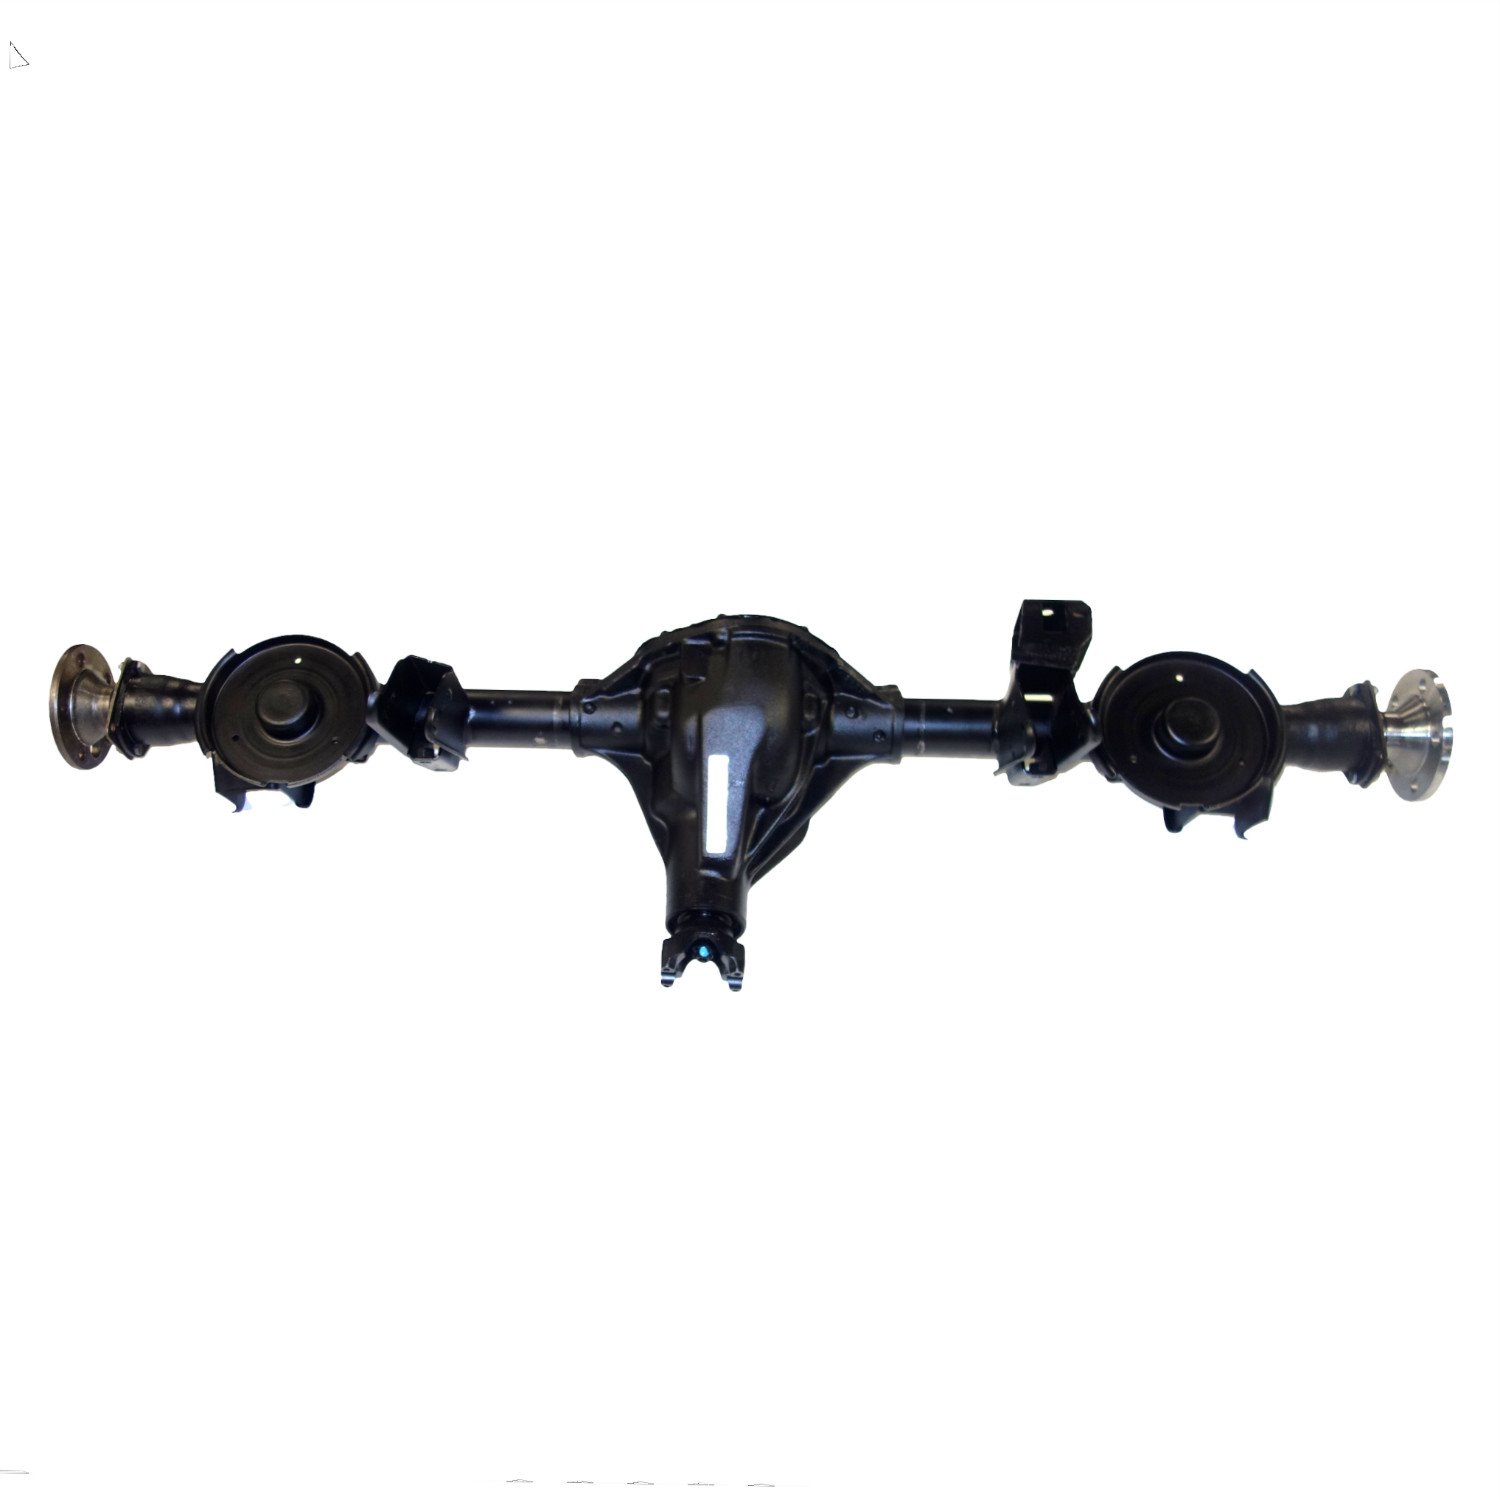 Remanufactured Complete Axle Assembly for Dana 44 03-06